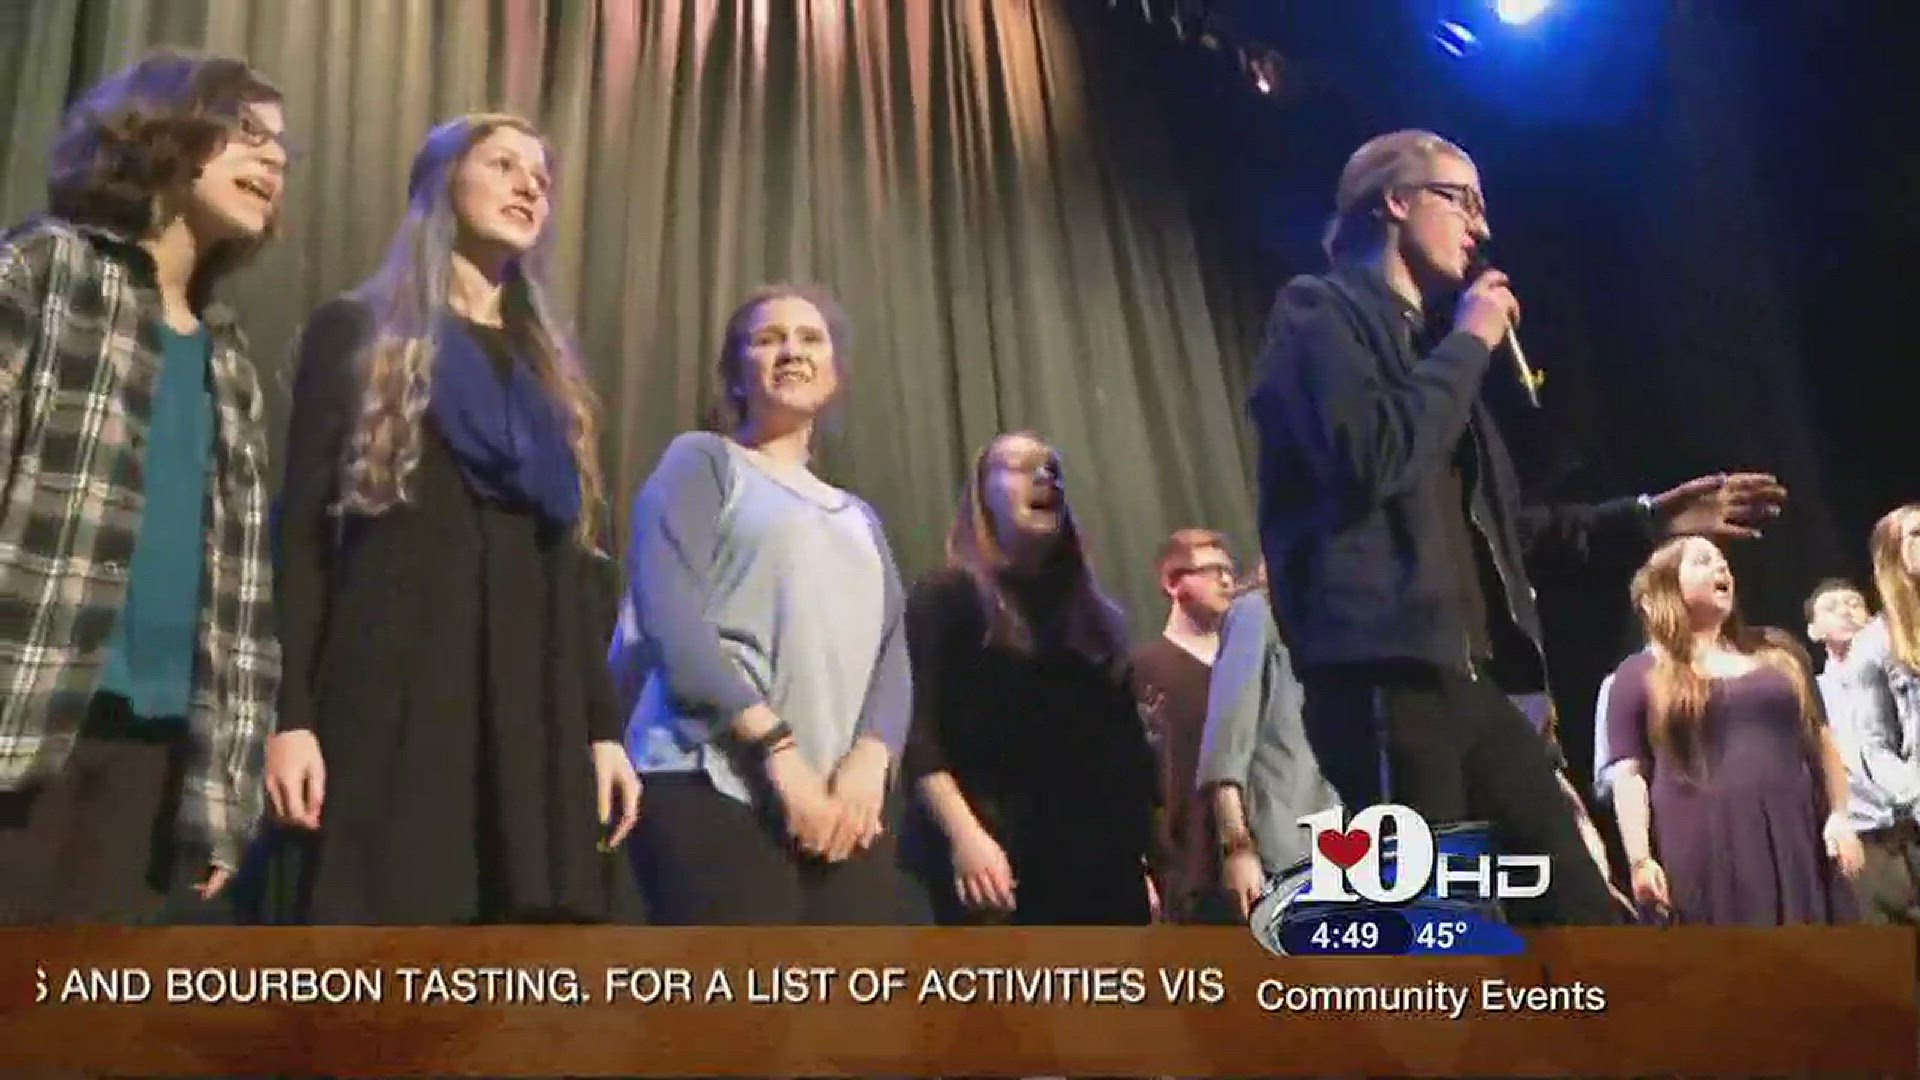 Live at Five at 4January 26, 2017Members of the Seymour High School rEAGLE Harmonics A Capella group perform a medley of Michael Jackson hit songs.